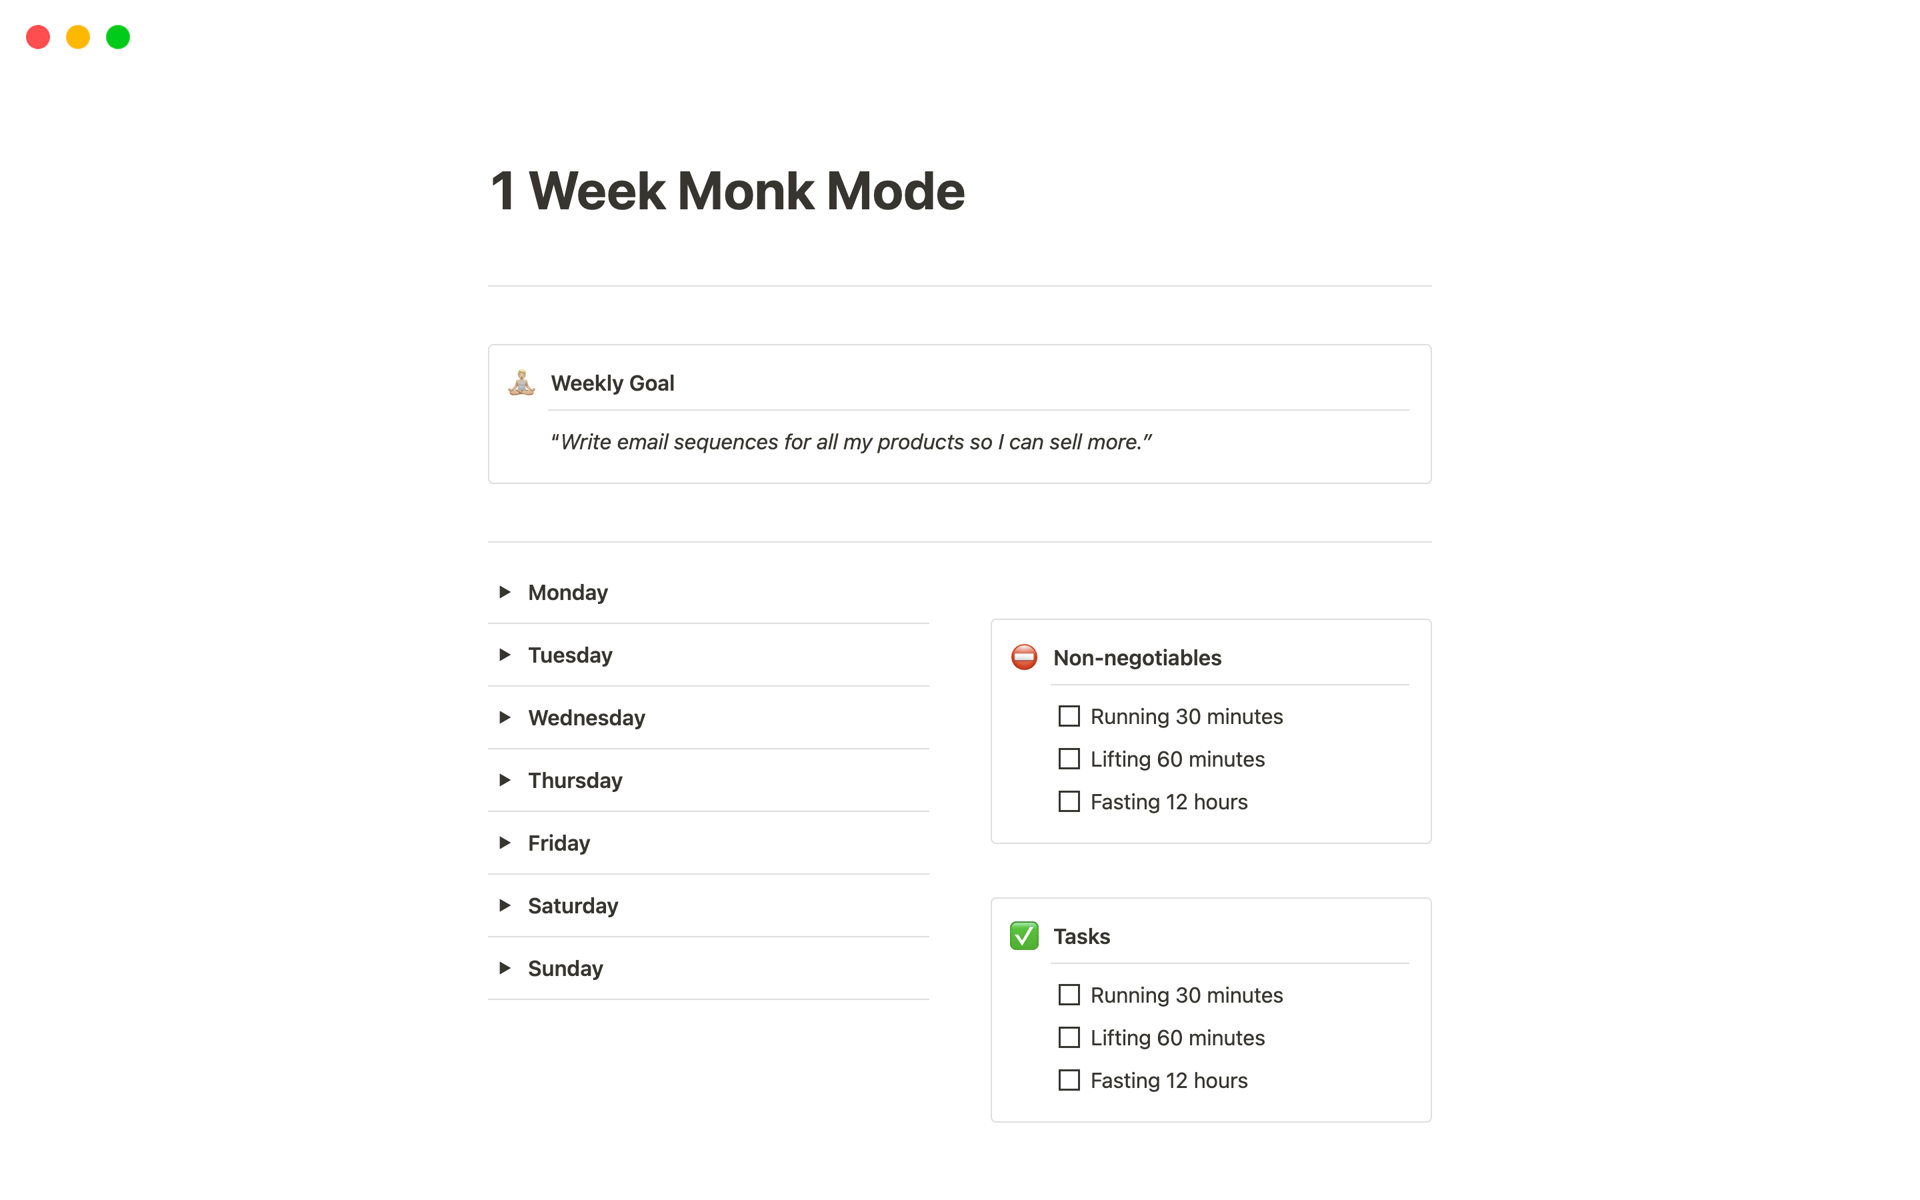 Supercharge your growth with Monk Mode
